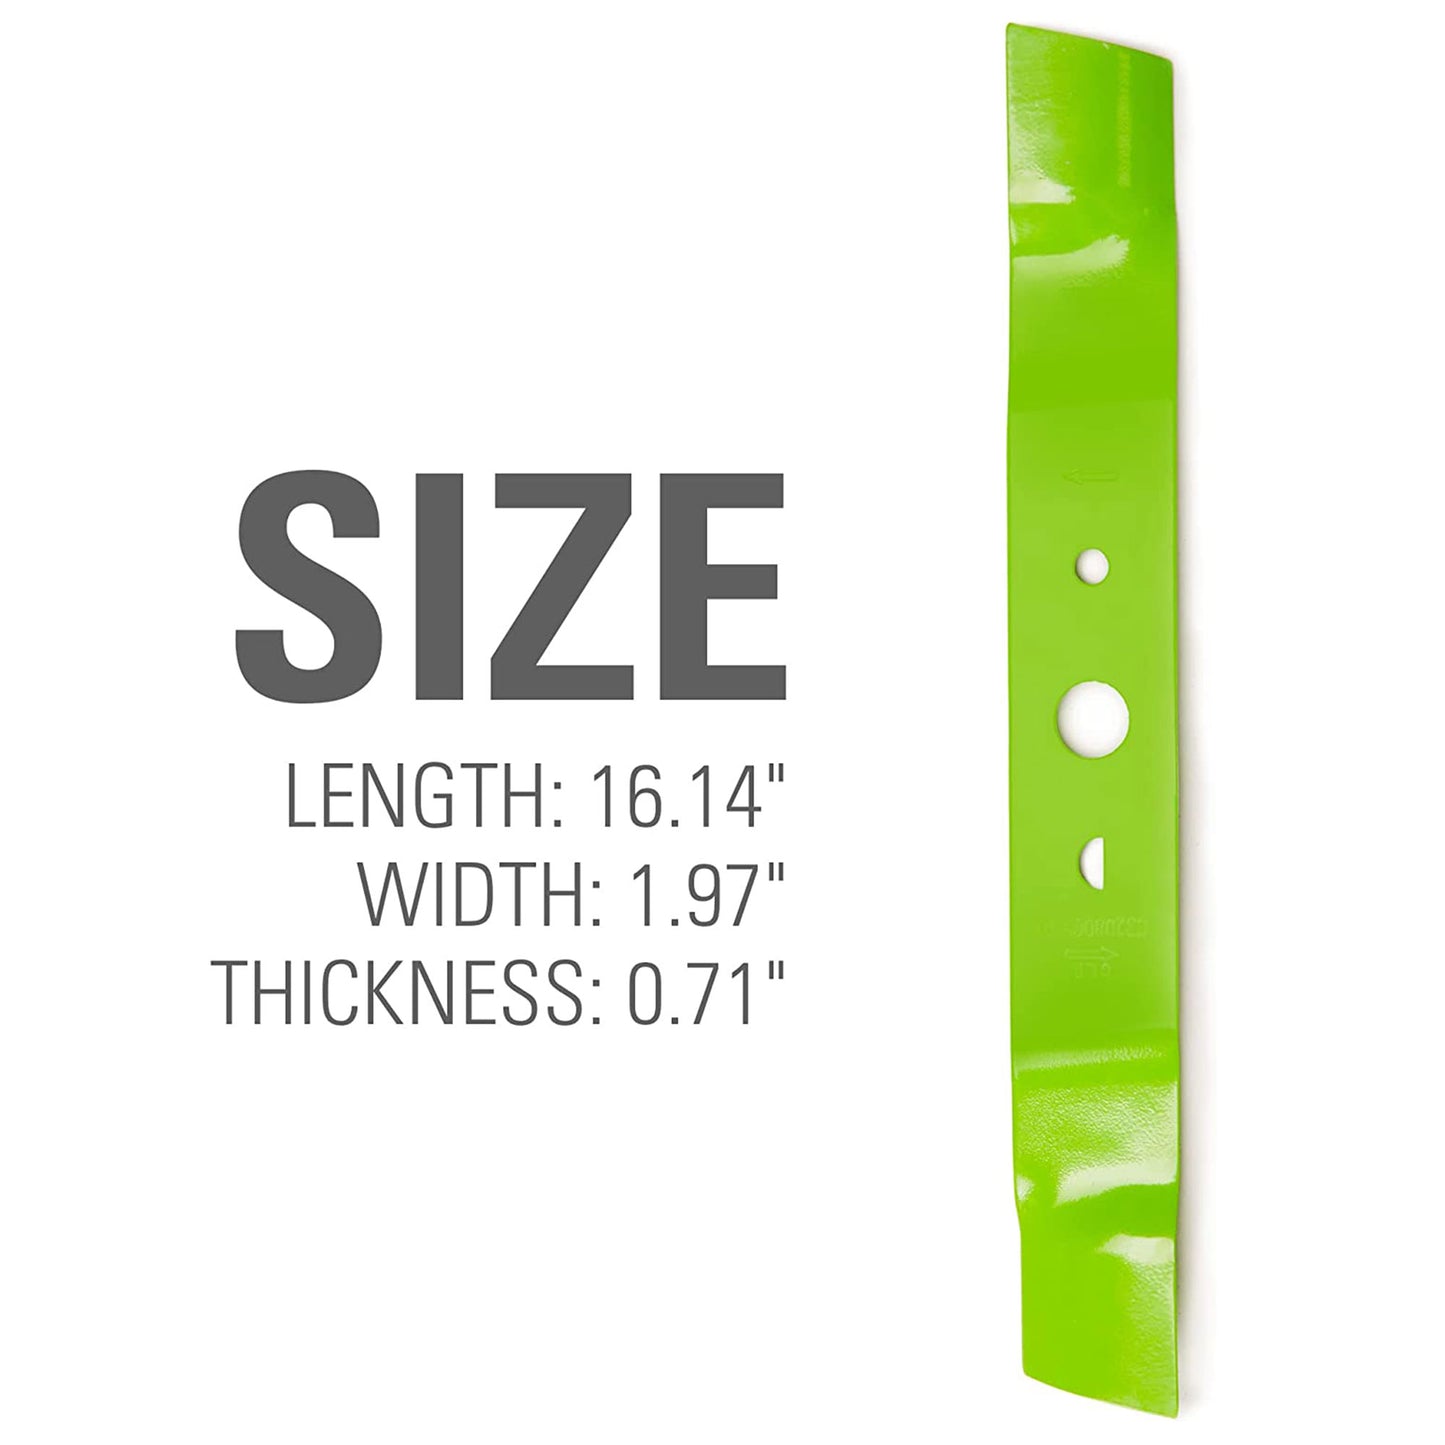 17'' Replacement Lawn Mower Blade